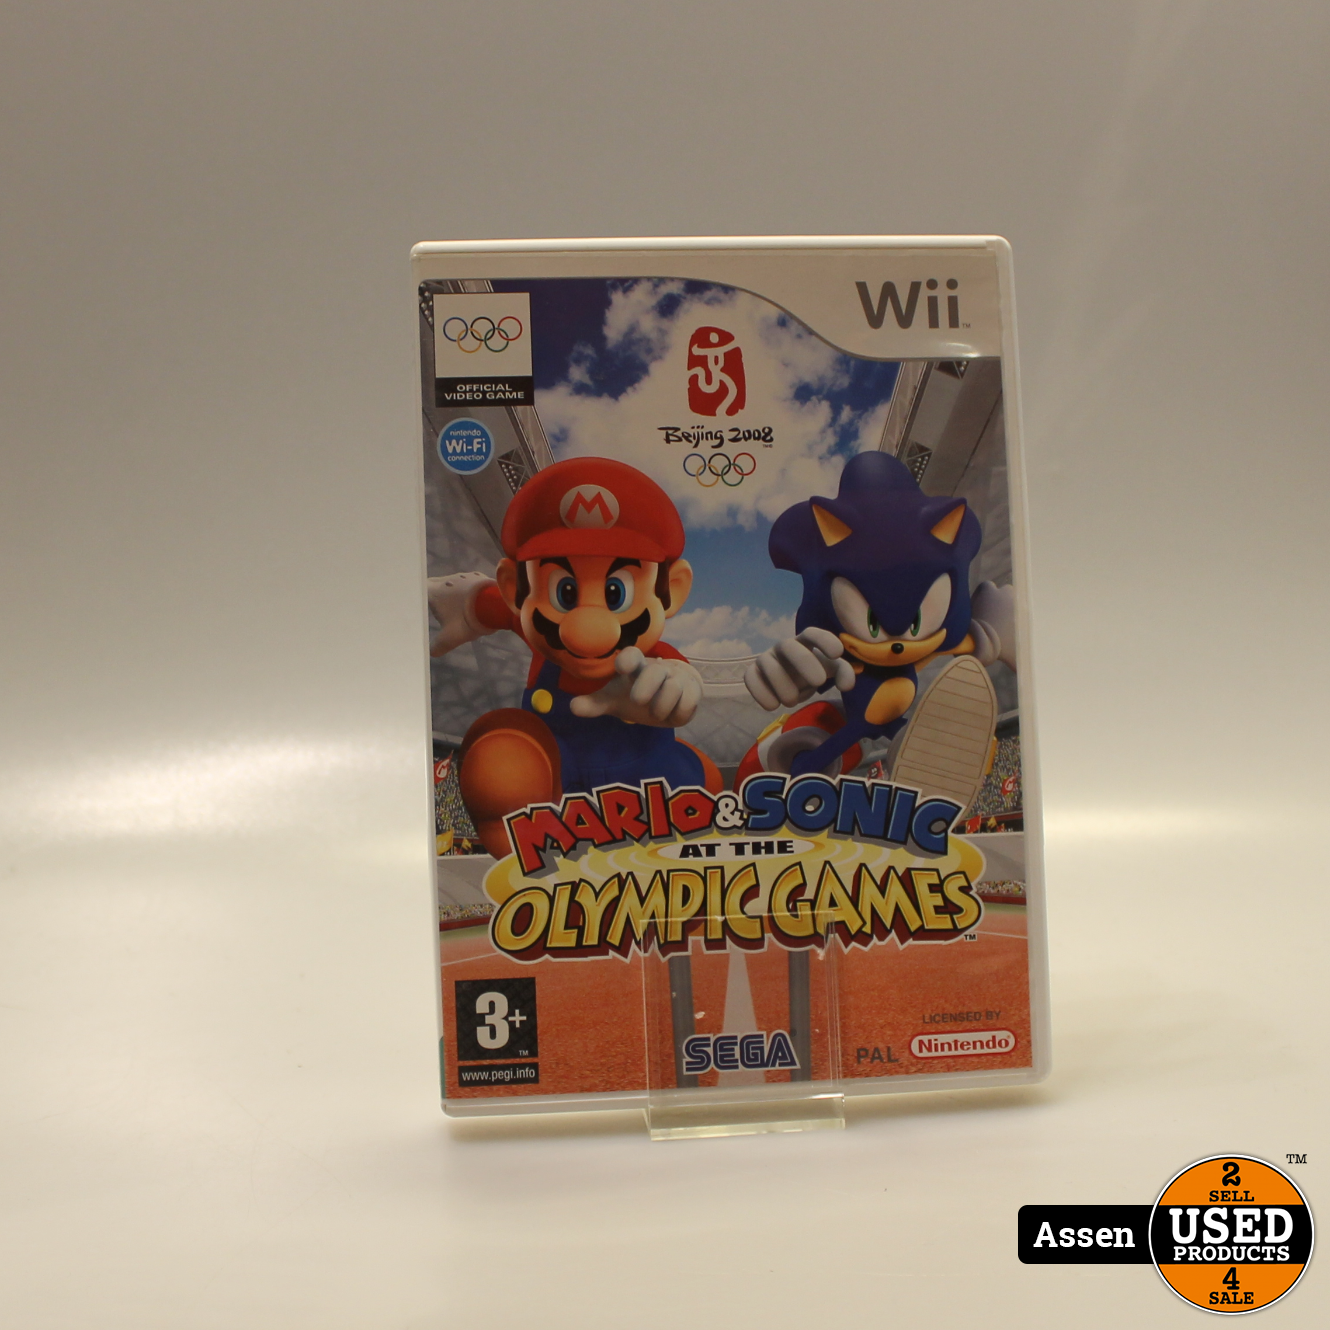 Mario & sonic at the olympic games || wii game Used Products